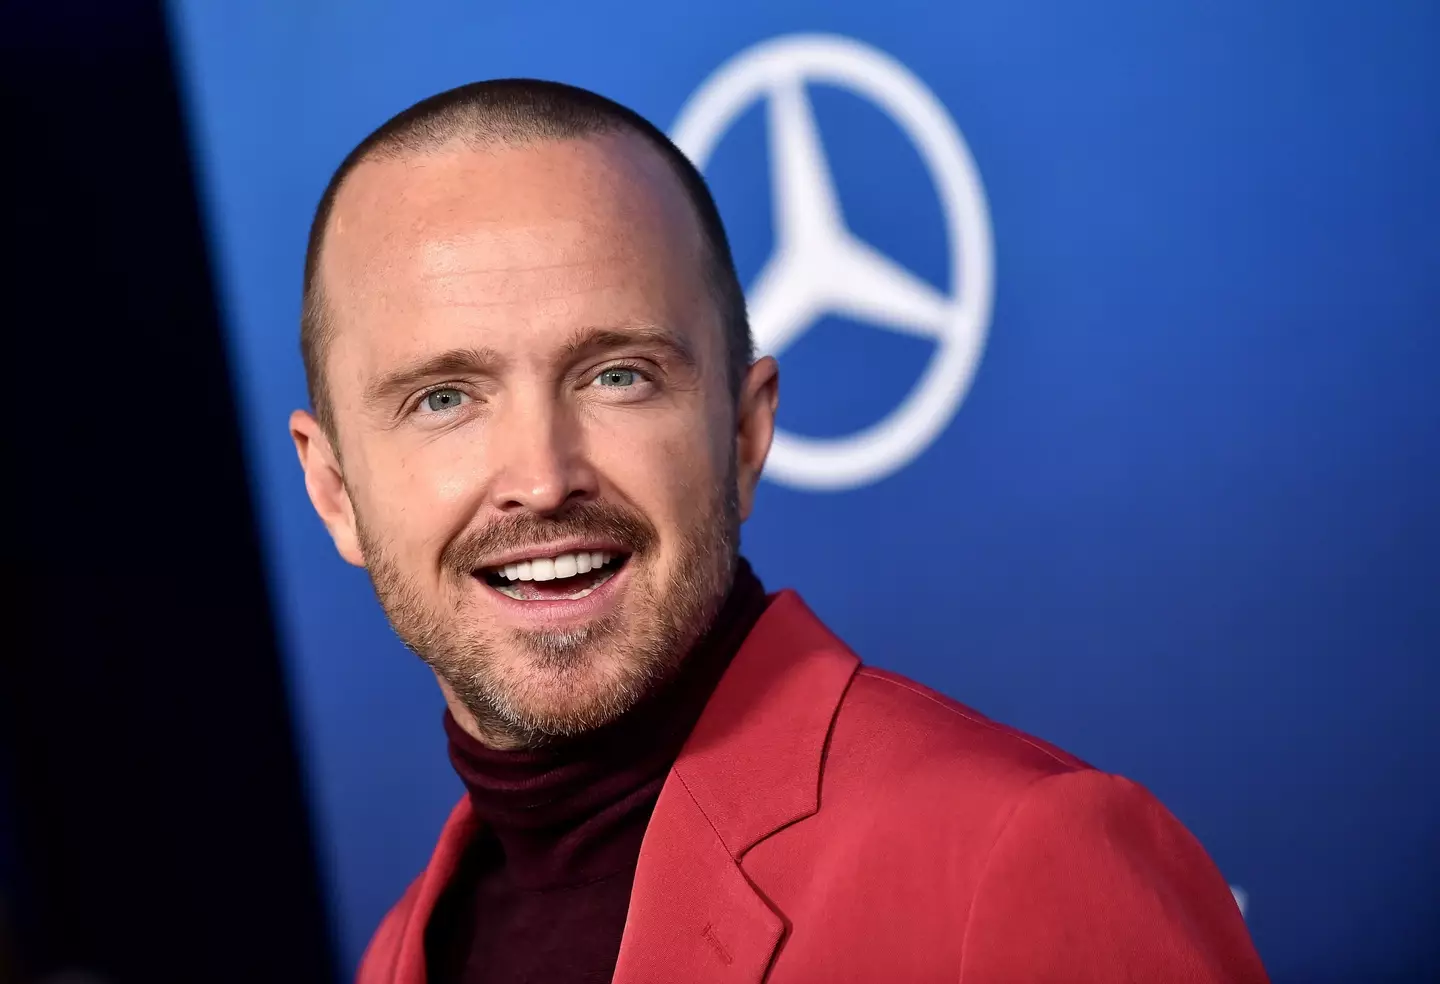 Aaron Paul has been spotted filming for Black Mirror.